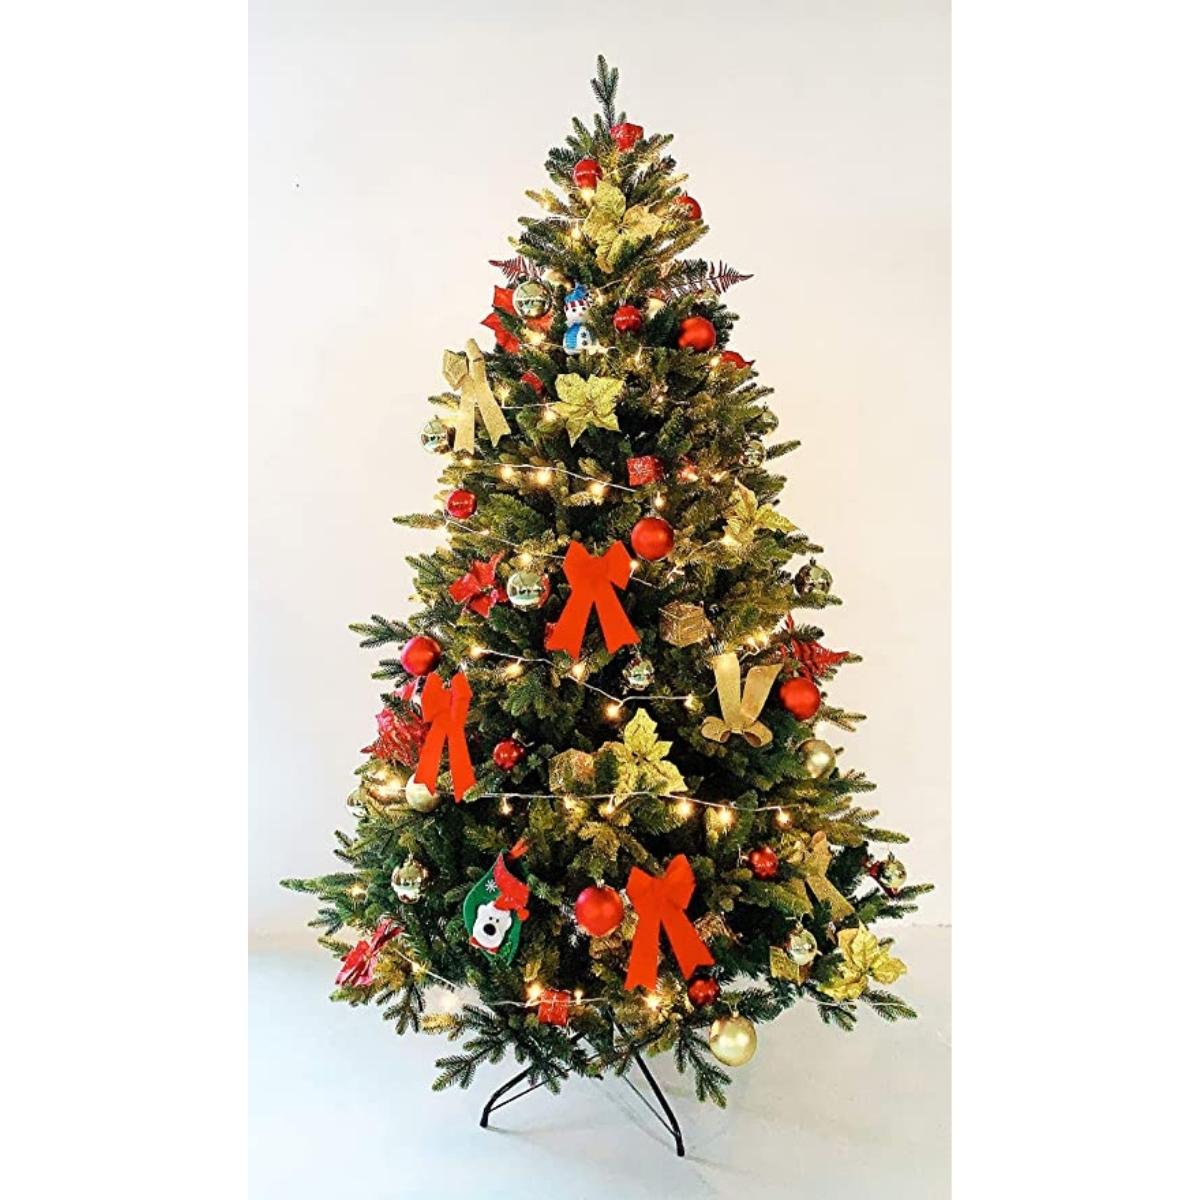 Evre Spruce 7Ft Christmas Tree Decorated on White Background